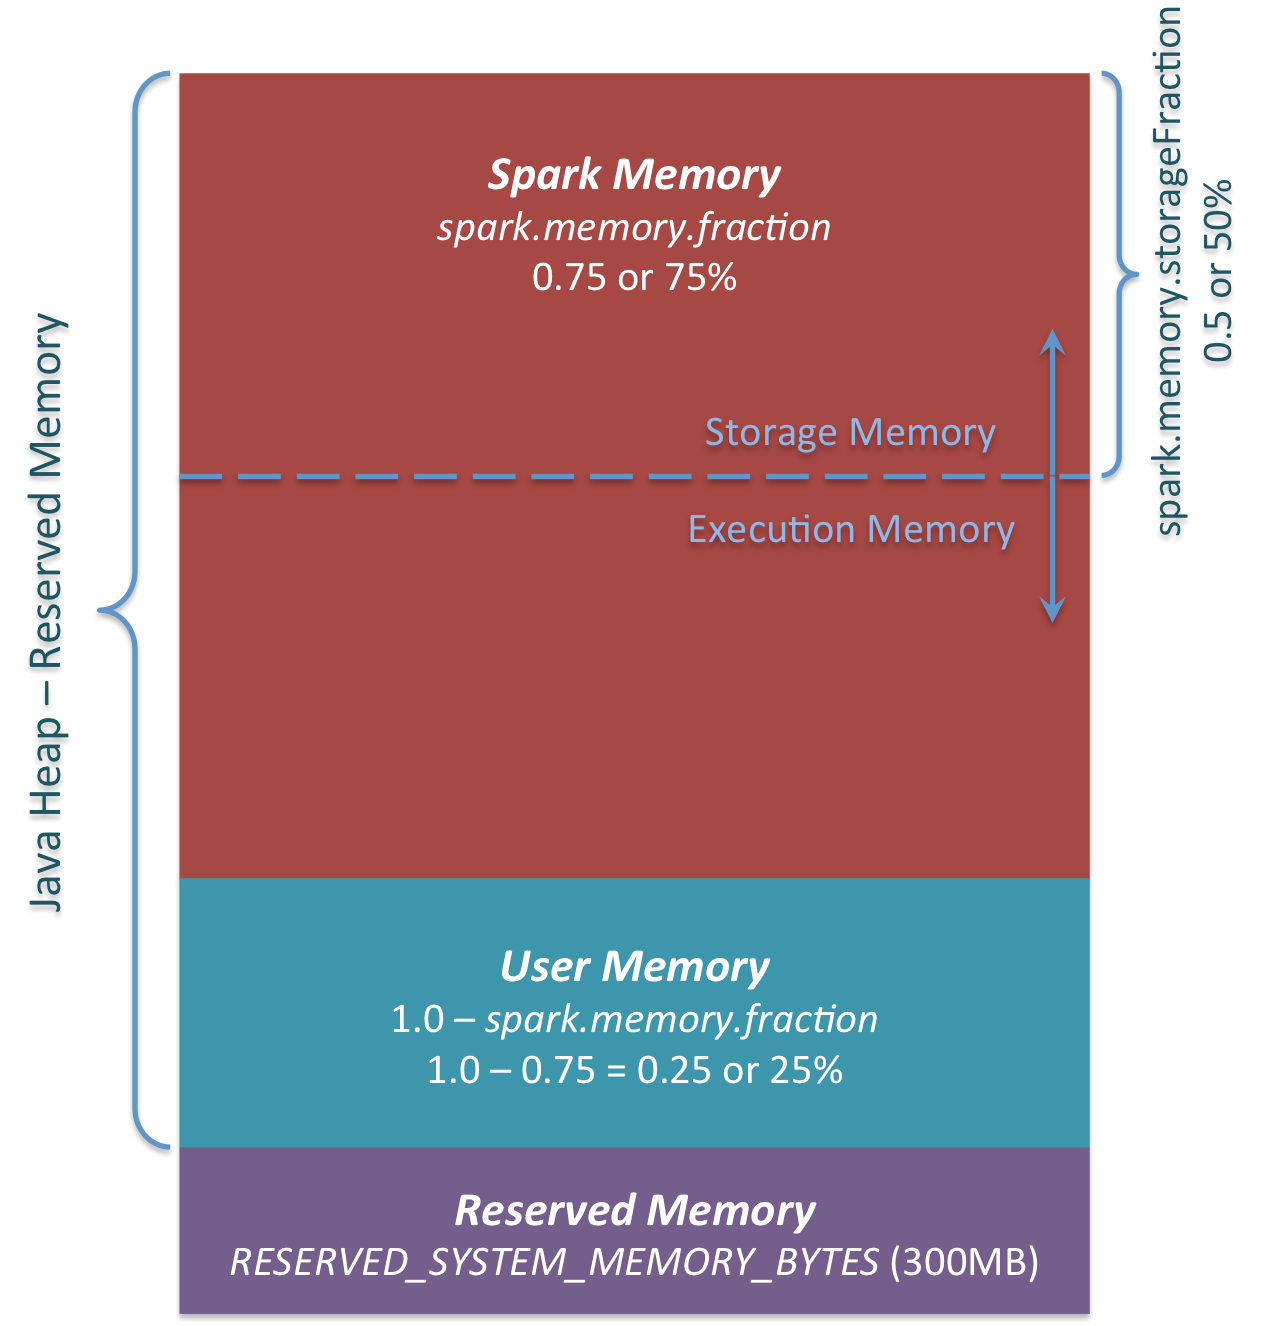 Spark Memory Management 1.6.0+Apache Spark Unified Memory Manager introduced in v1.6.0+